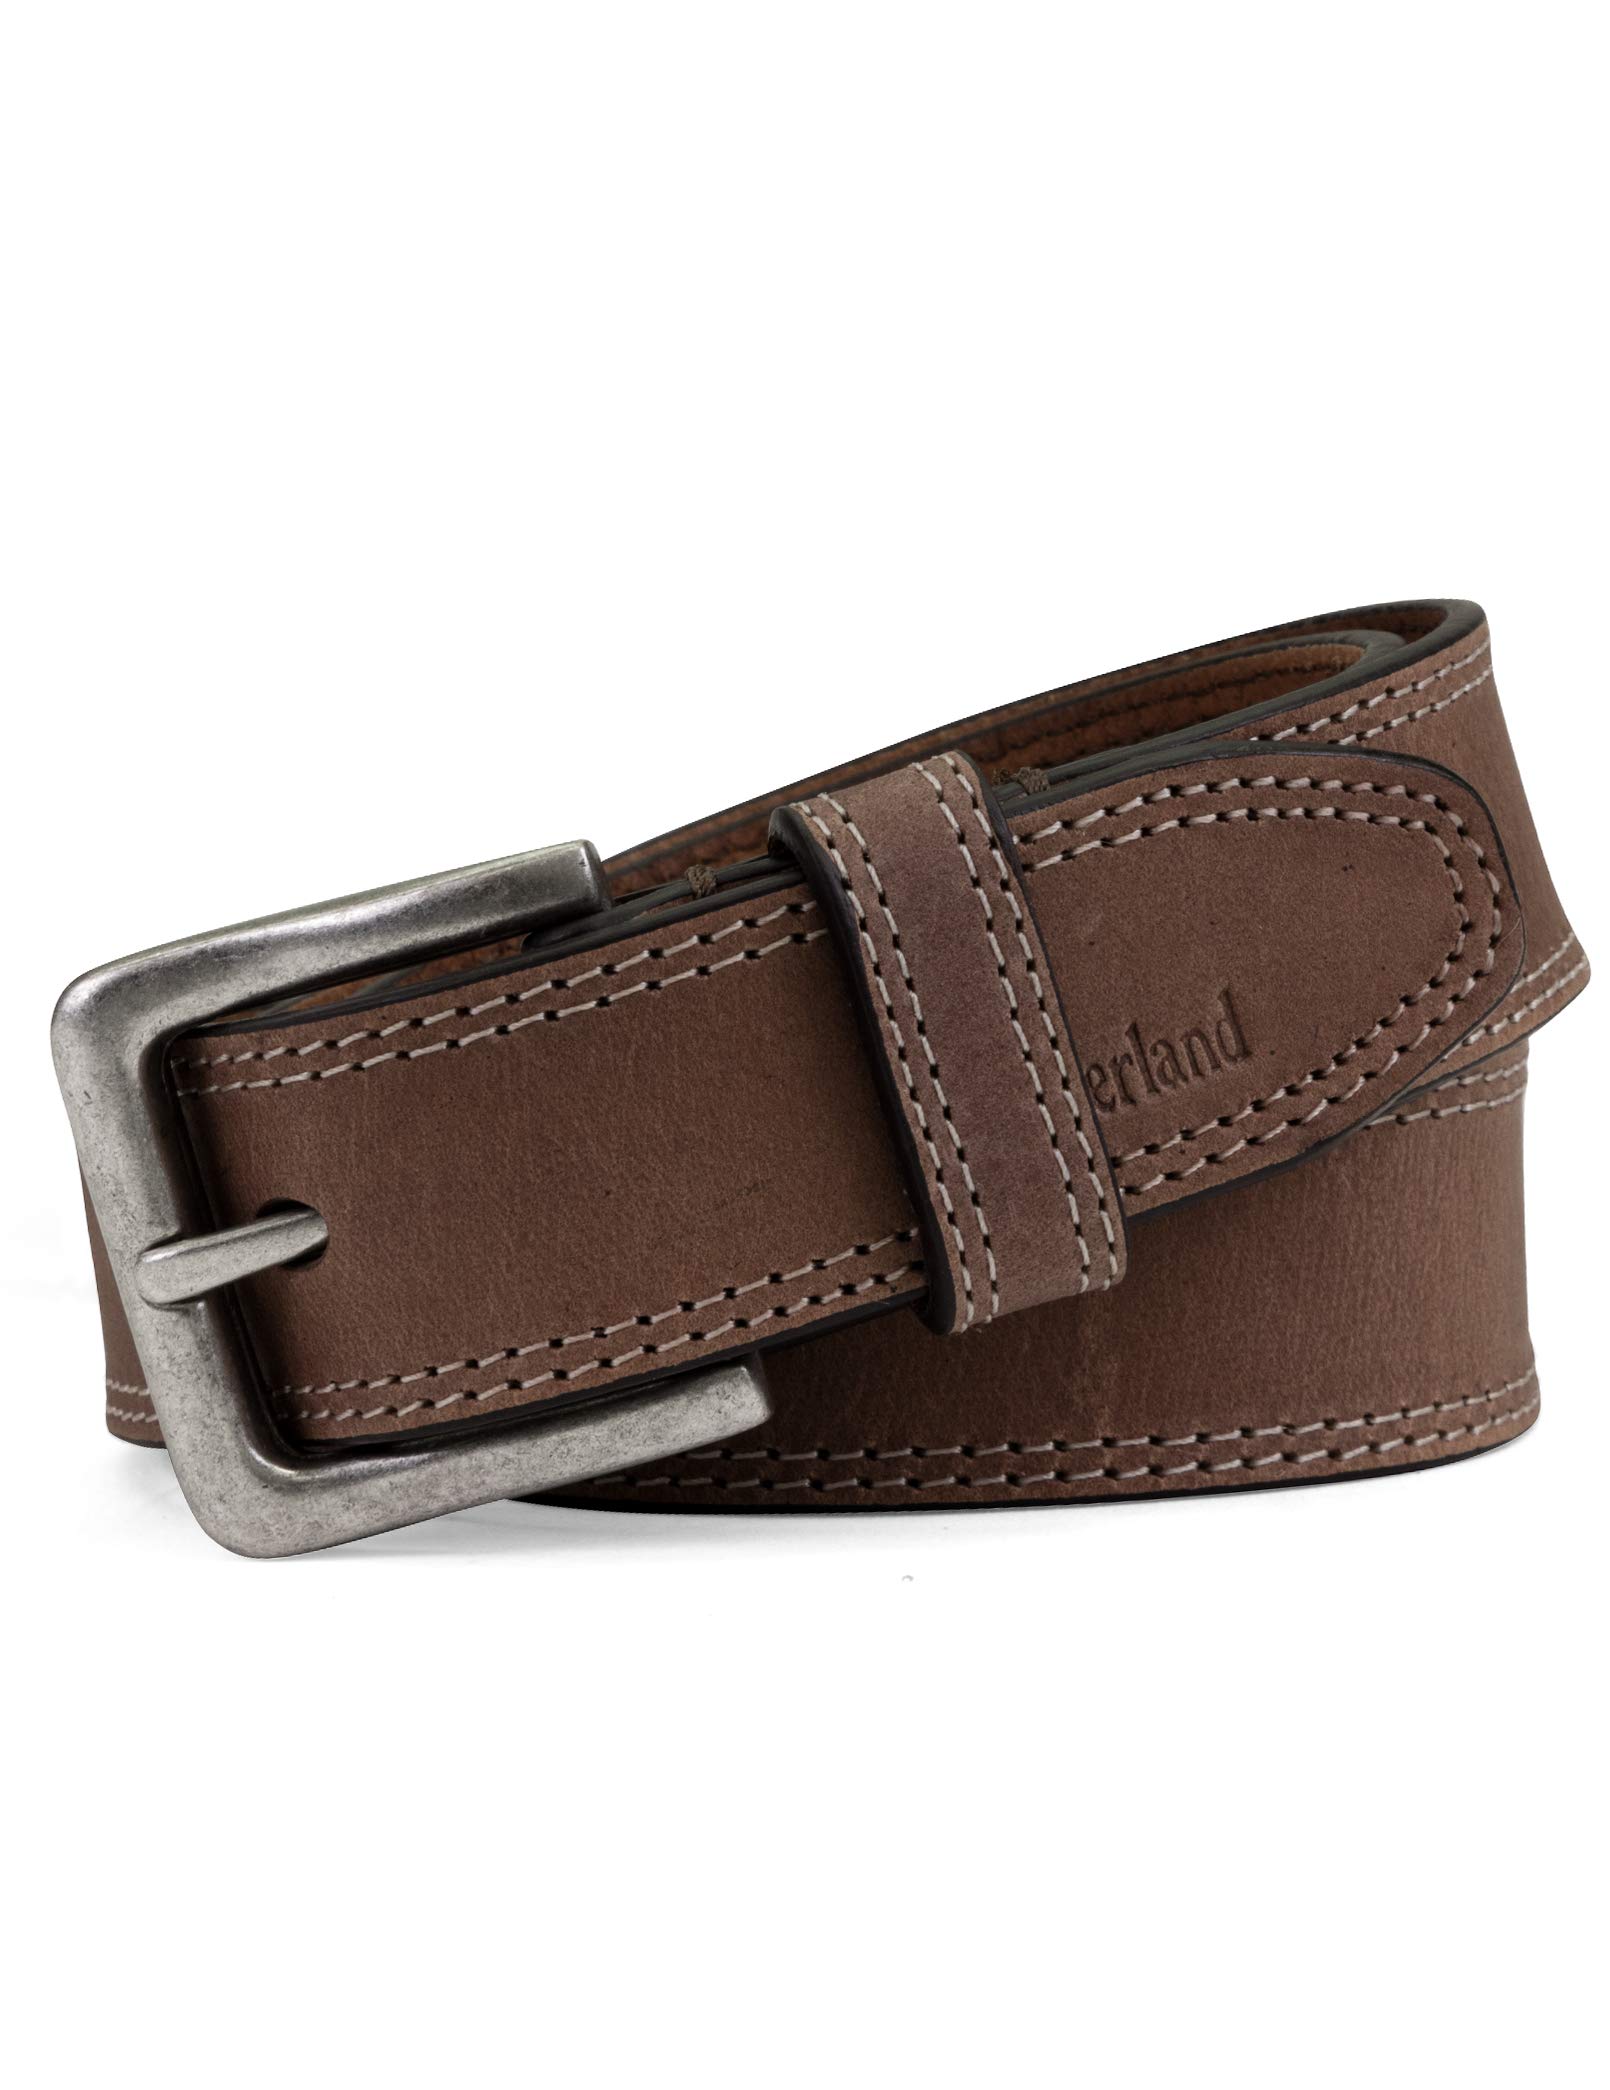 Timberland Men's Classic Leather Jean Belt 1.4 Inches Wide (Big & Tall Available)